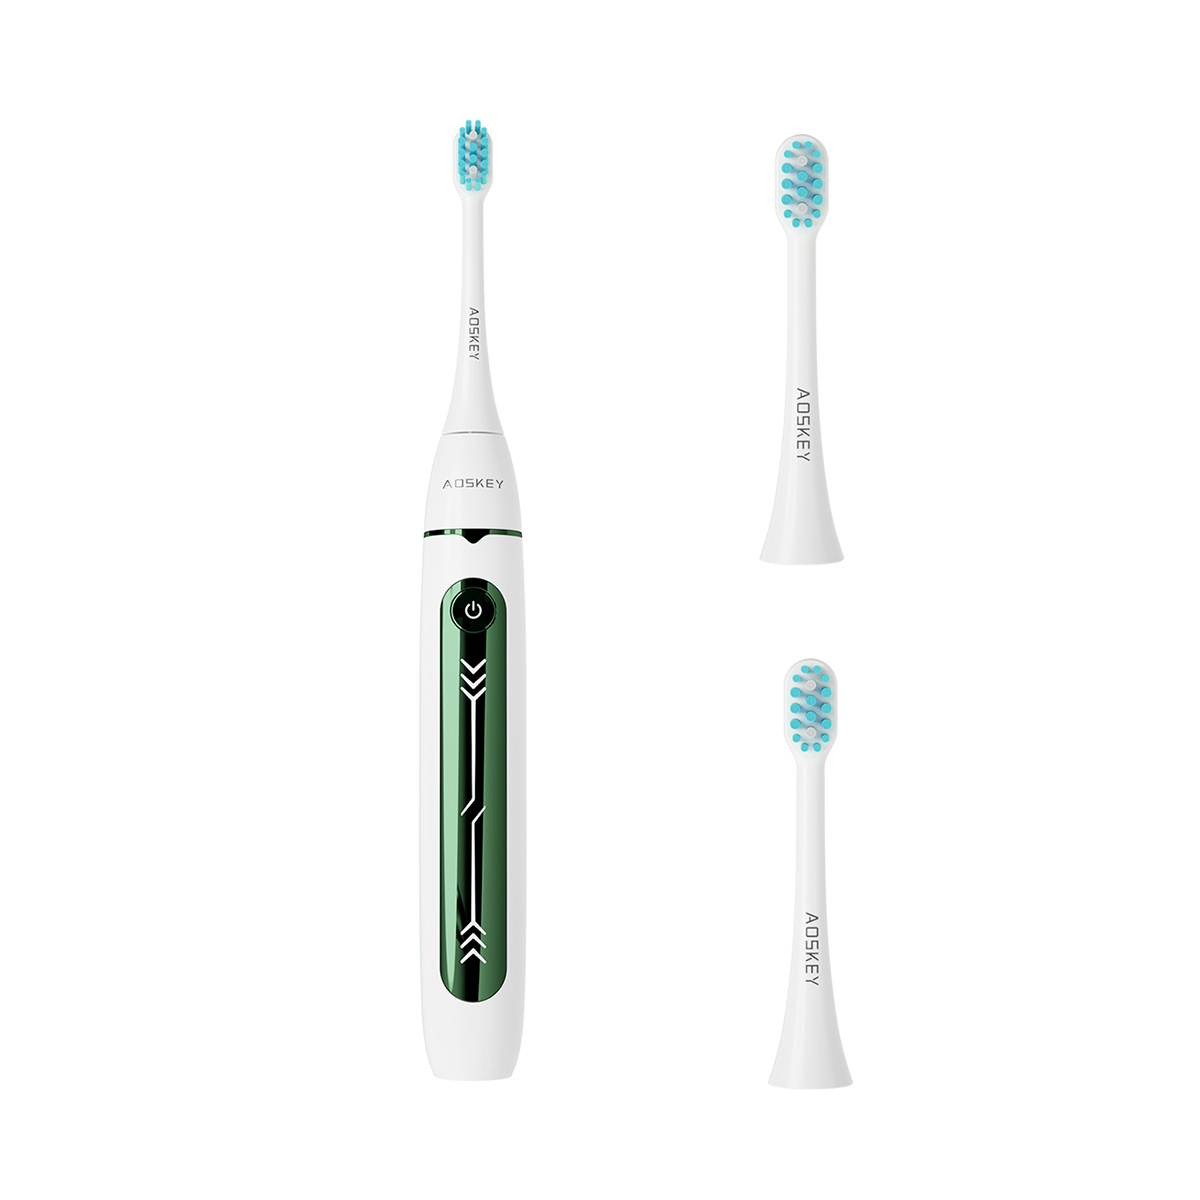 AOSKEY X20 Sonic Electric Toothbrush